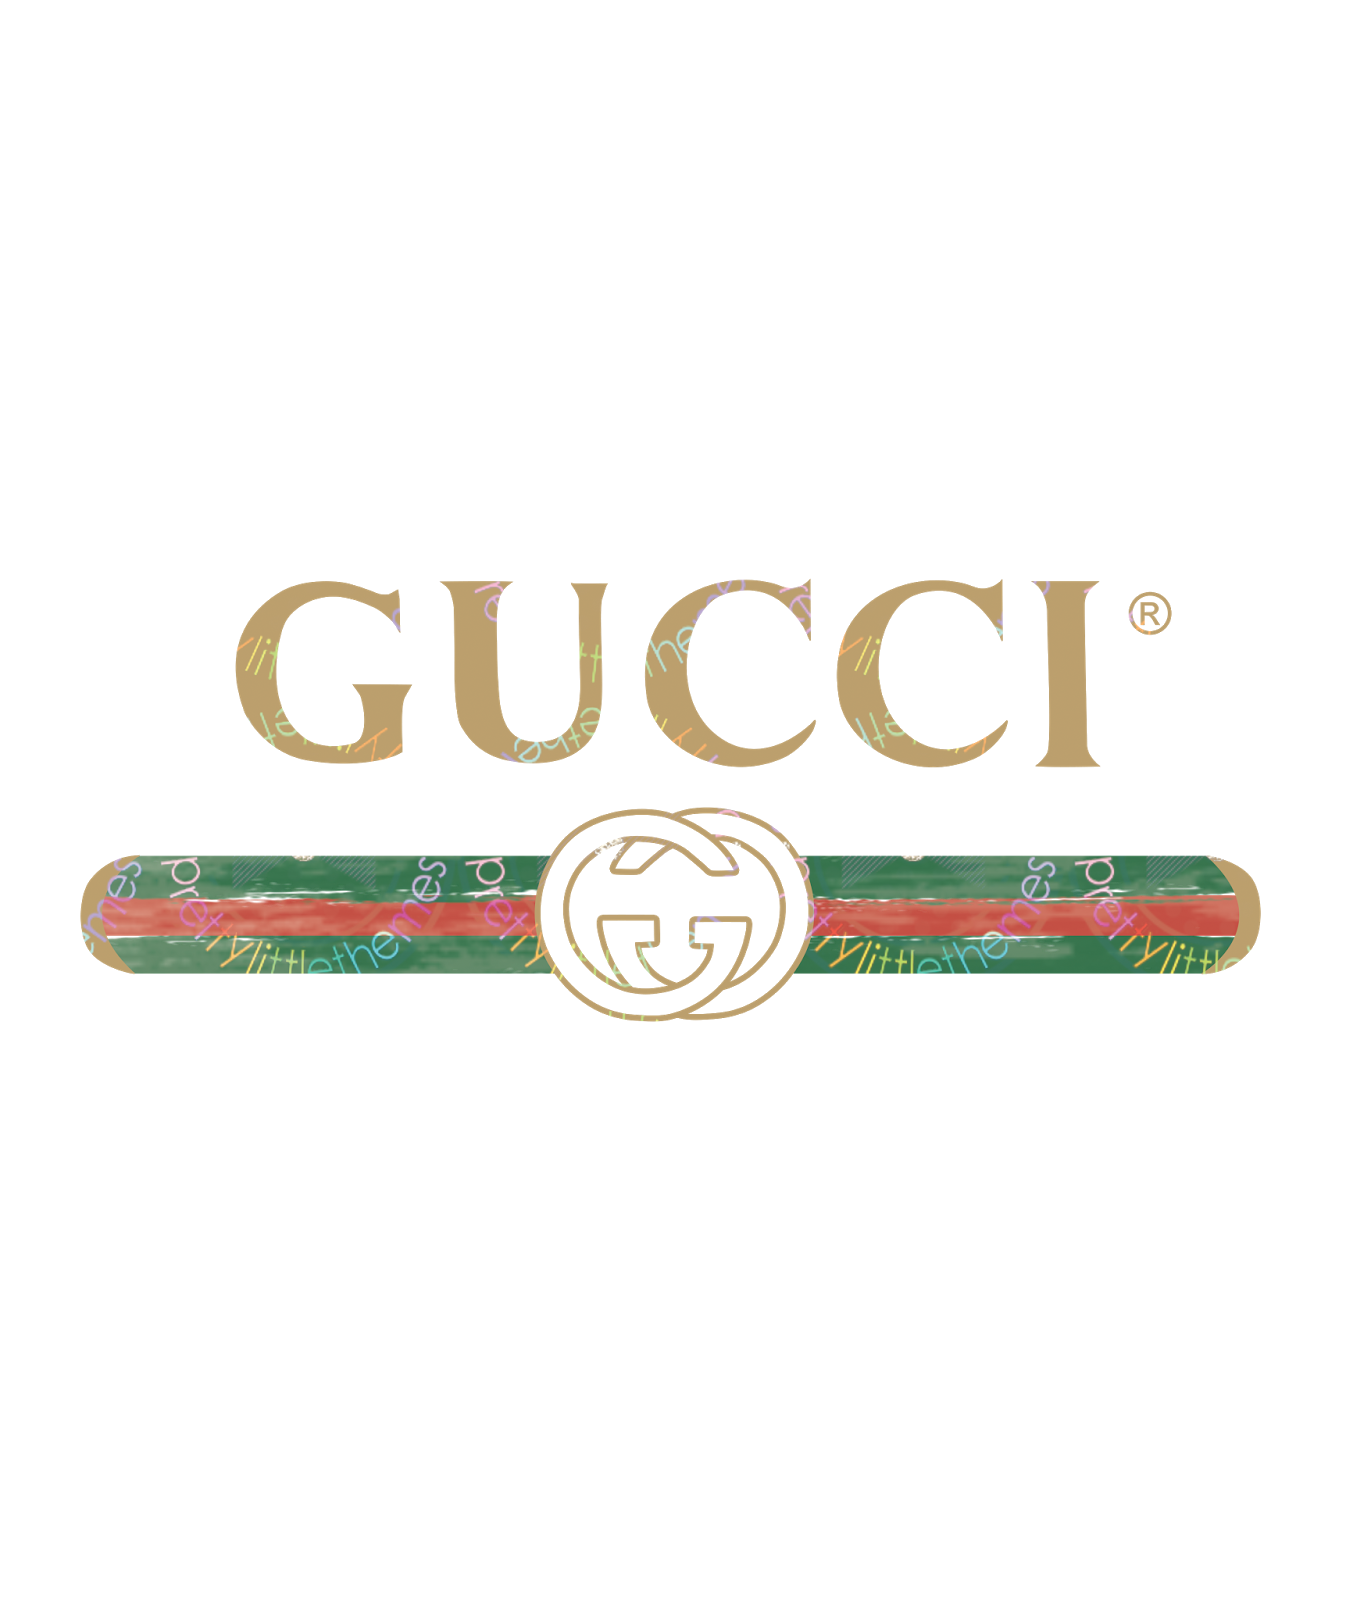 Gucci Logo Vintage - Gucci is the name of a luxury italian fashion ...